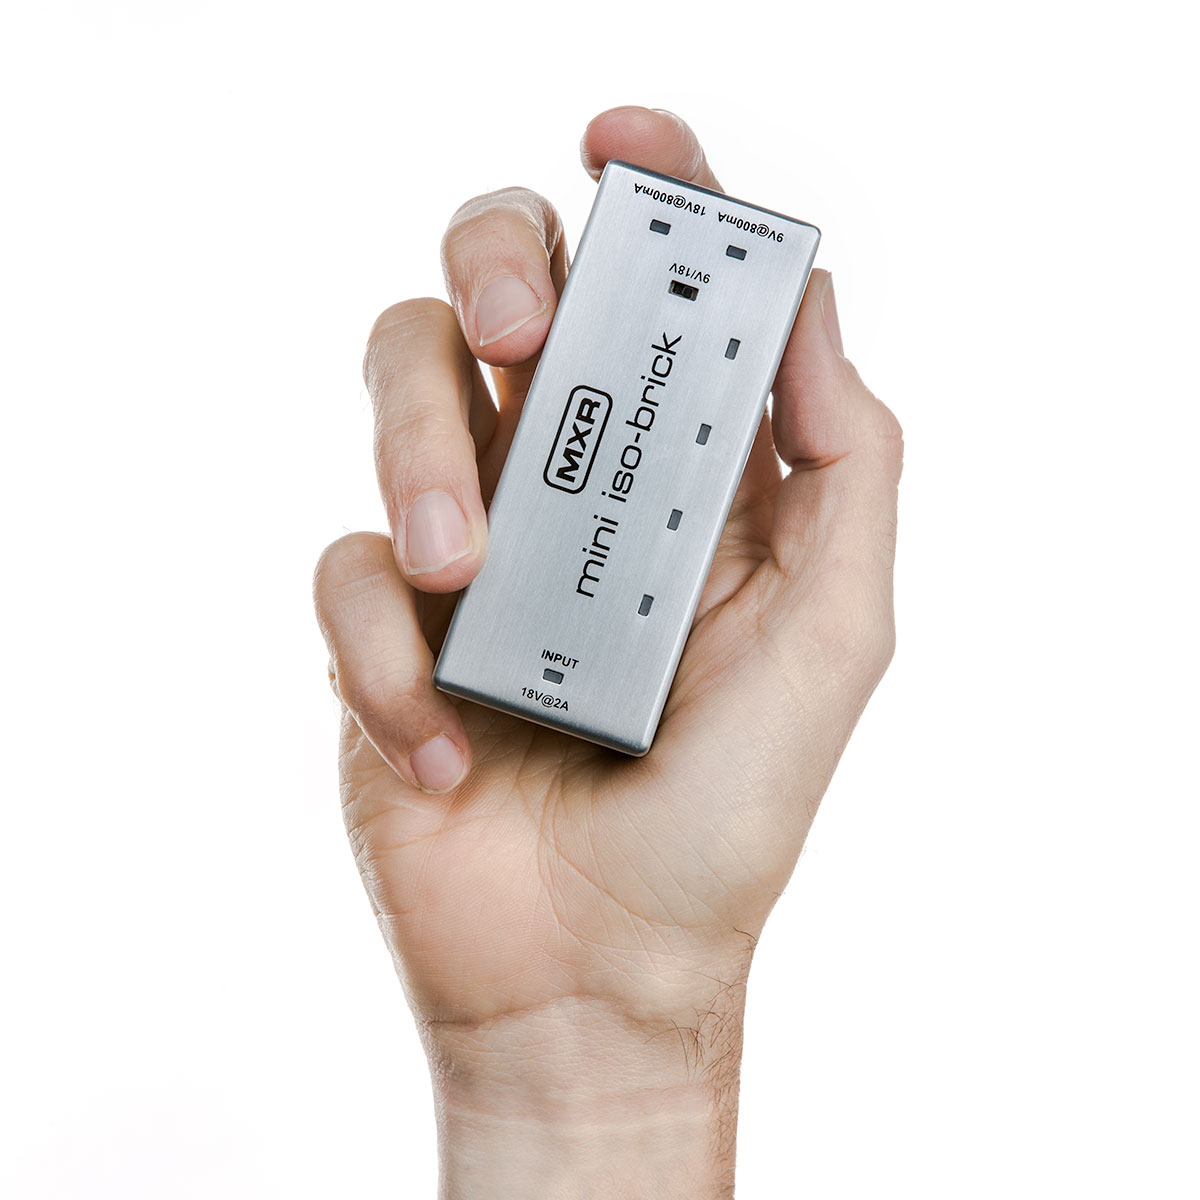 WHICH MXR® POWER SUPPLY IS RIGHT FOR YOU? - Lifestyle - Dunlop